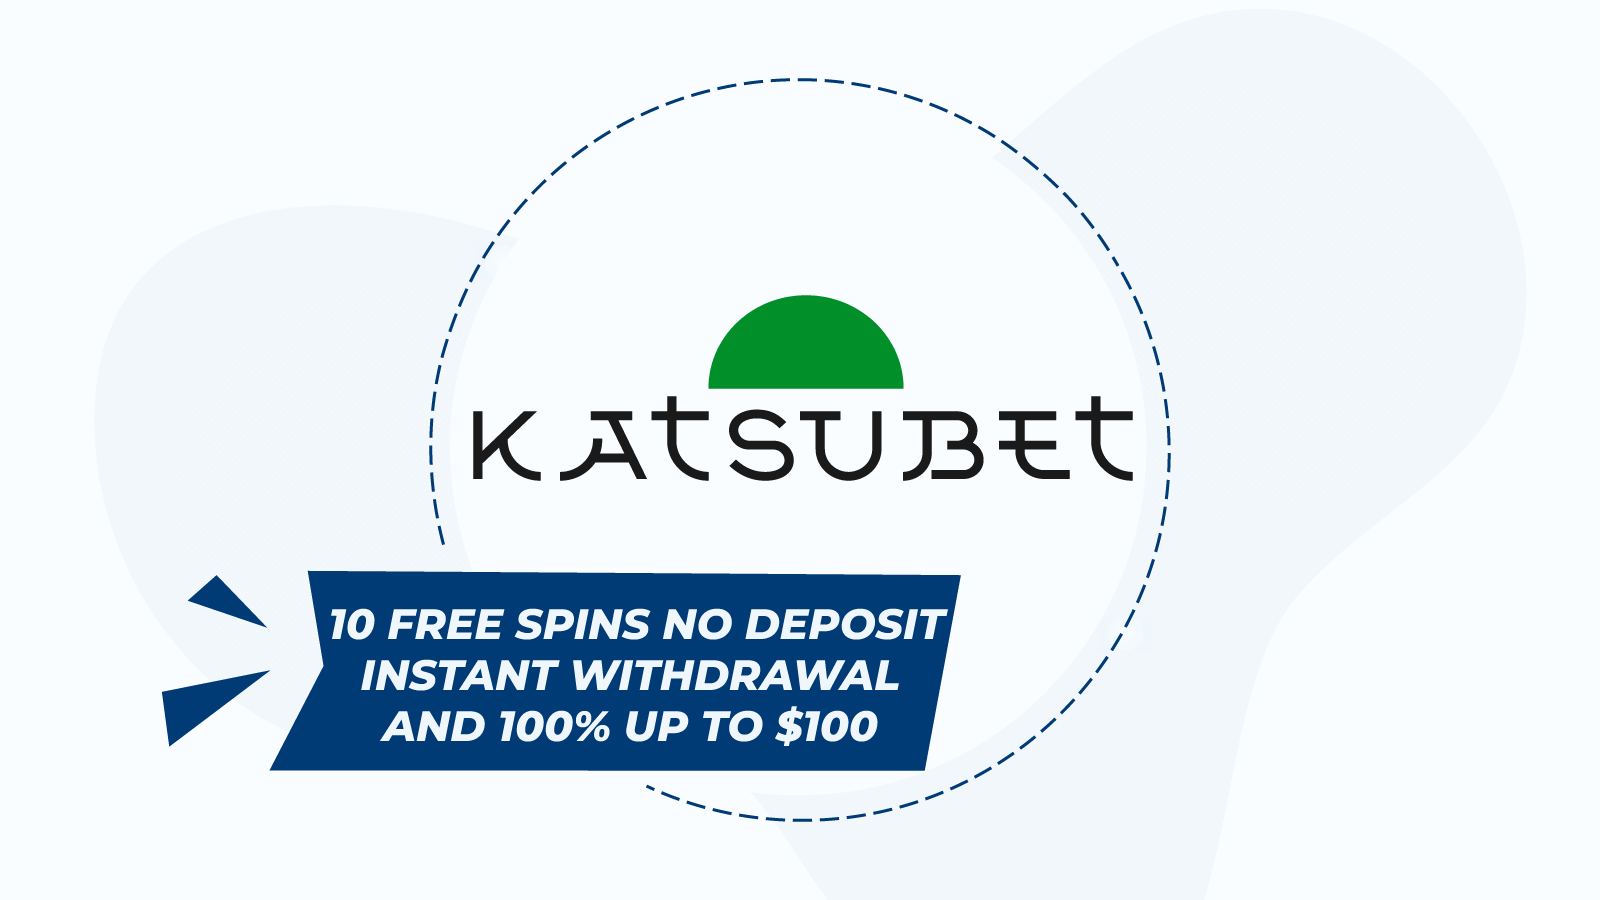 Start with 10 free spins no deposit instant withdrawal and 100% up to ¥100 at Katsubet